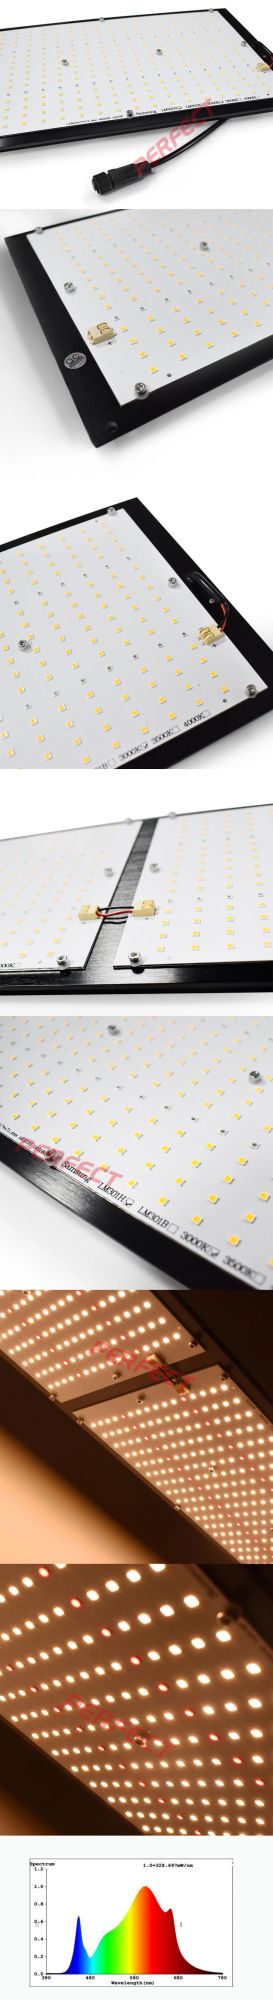 Wholesale Fast Delivery LED Lighting Lm301h 240W Best LED Grow Lights